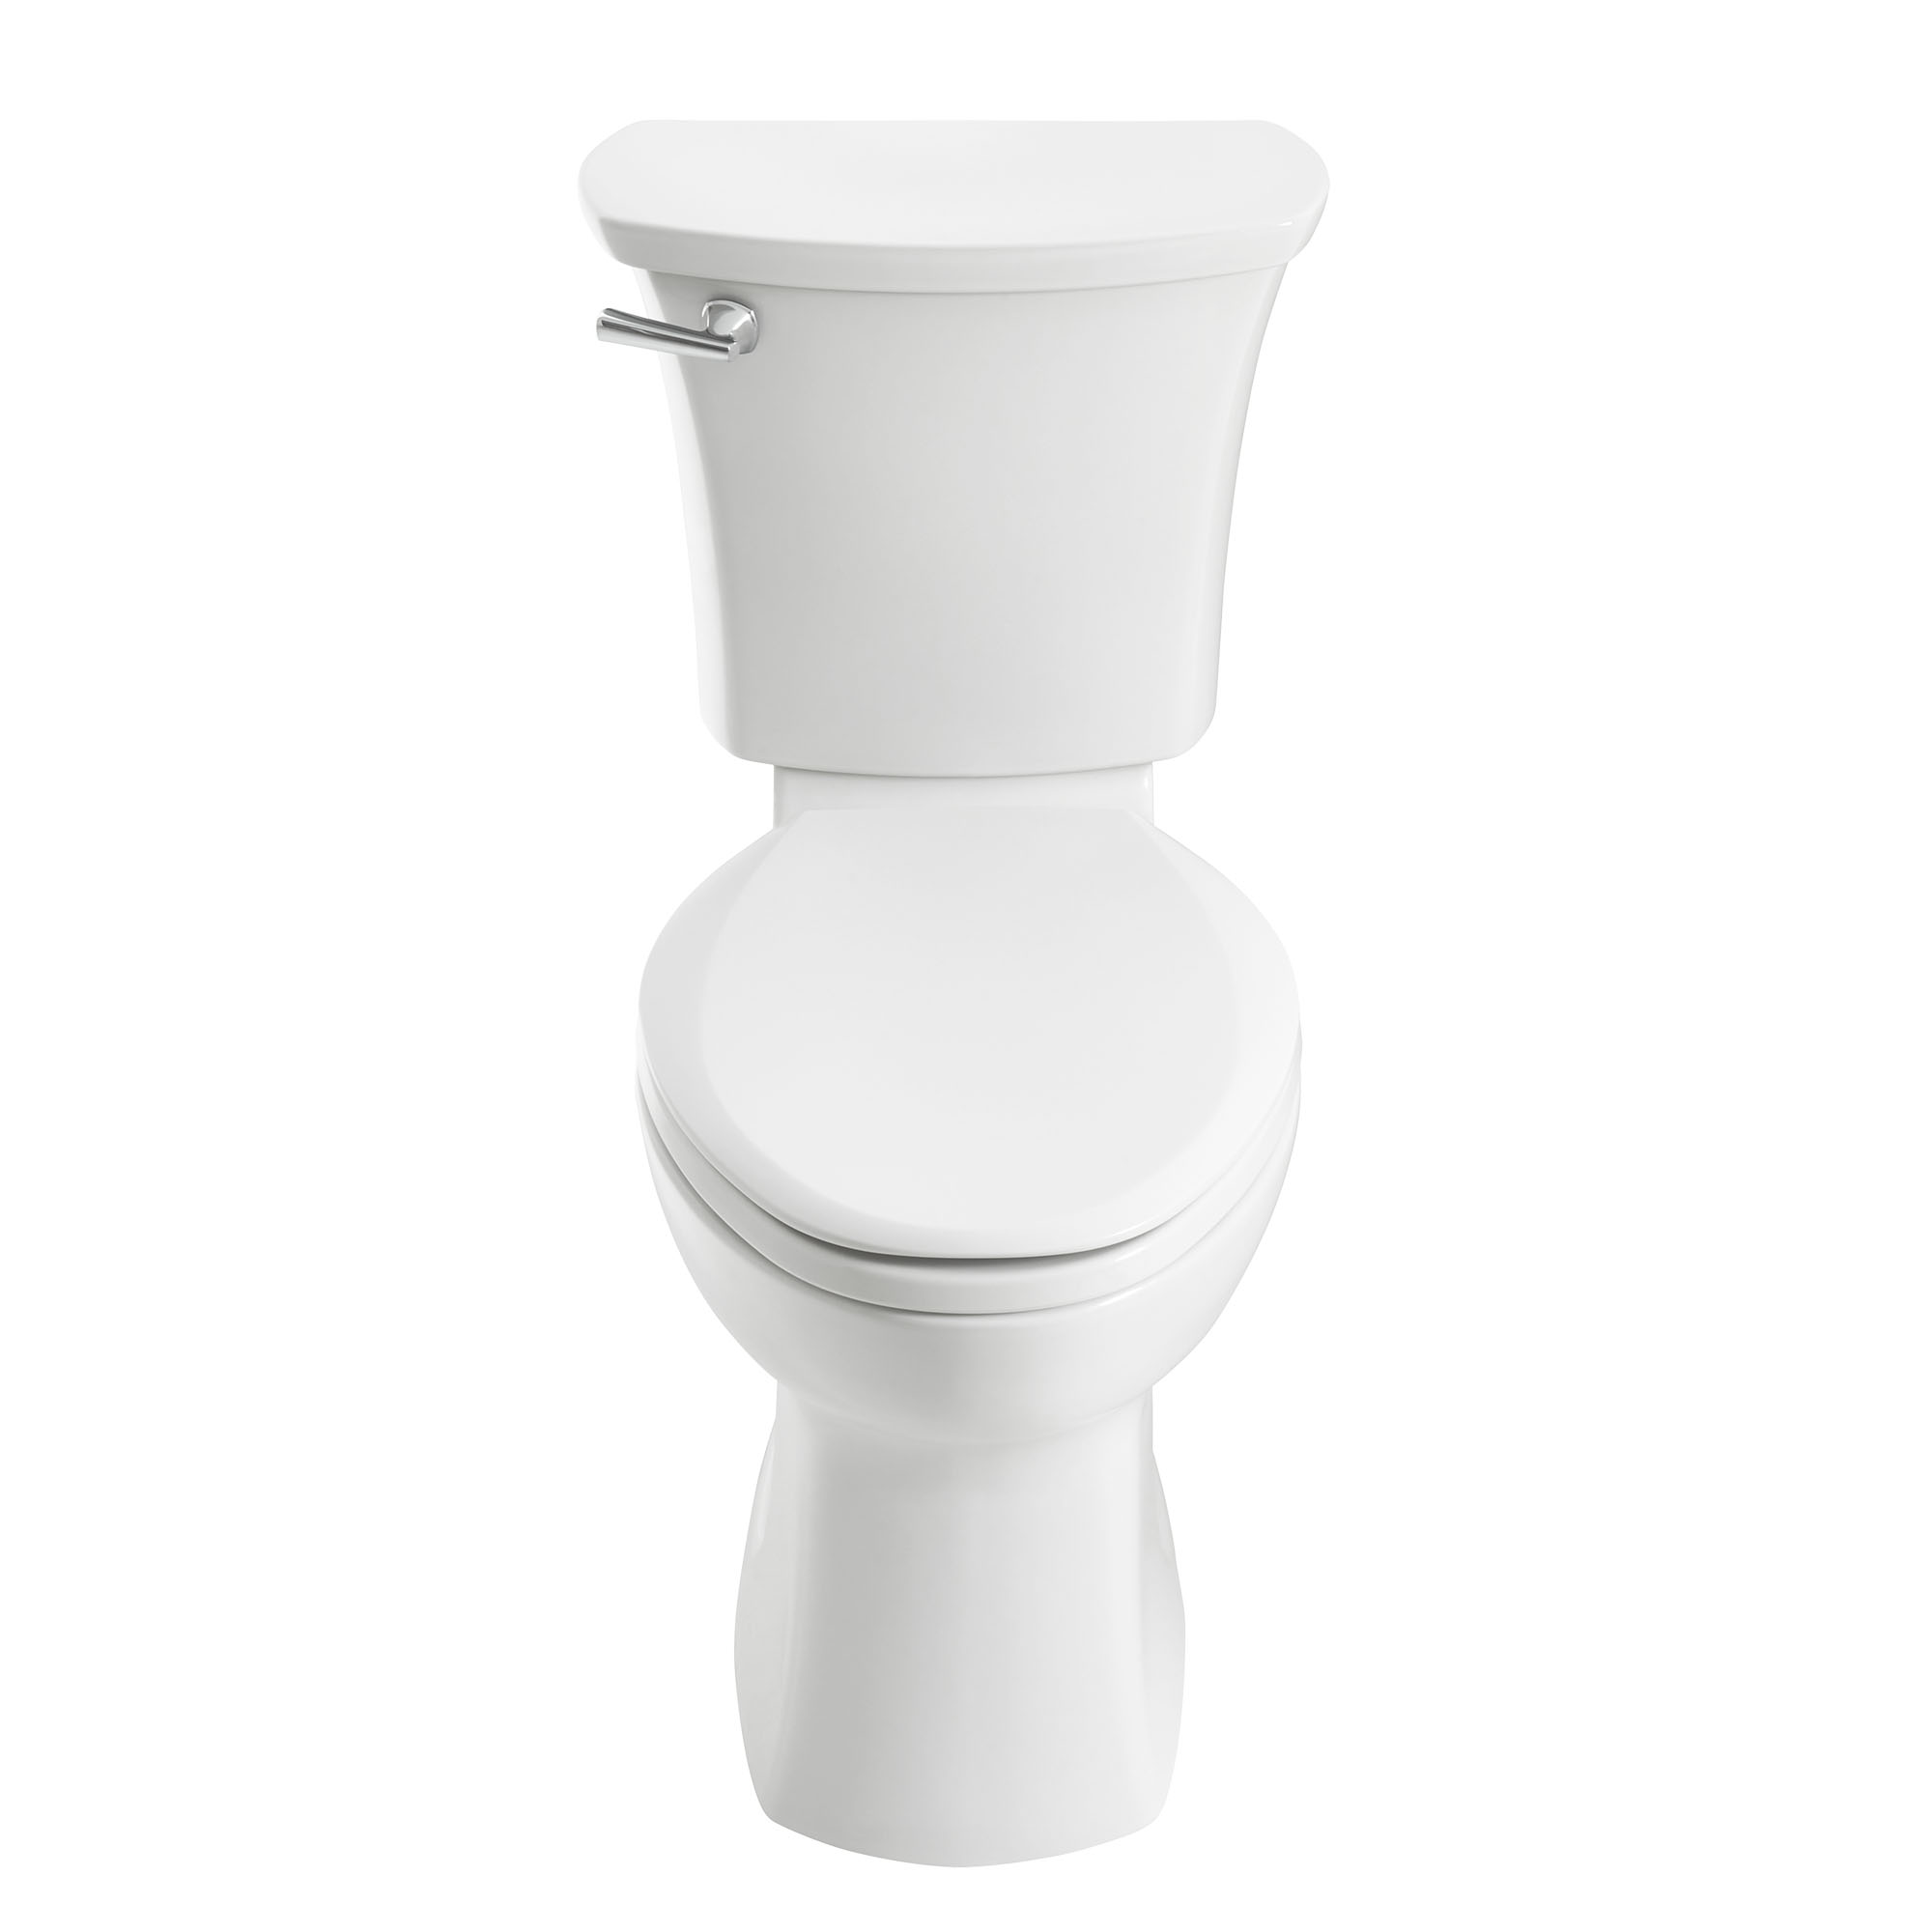 Edgemere® Two-Piece 1.28 gpf/4.8 Lpf Chair-Height Elongated Toilet